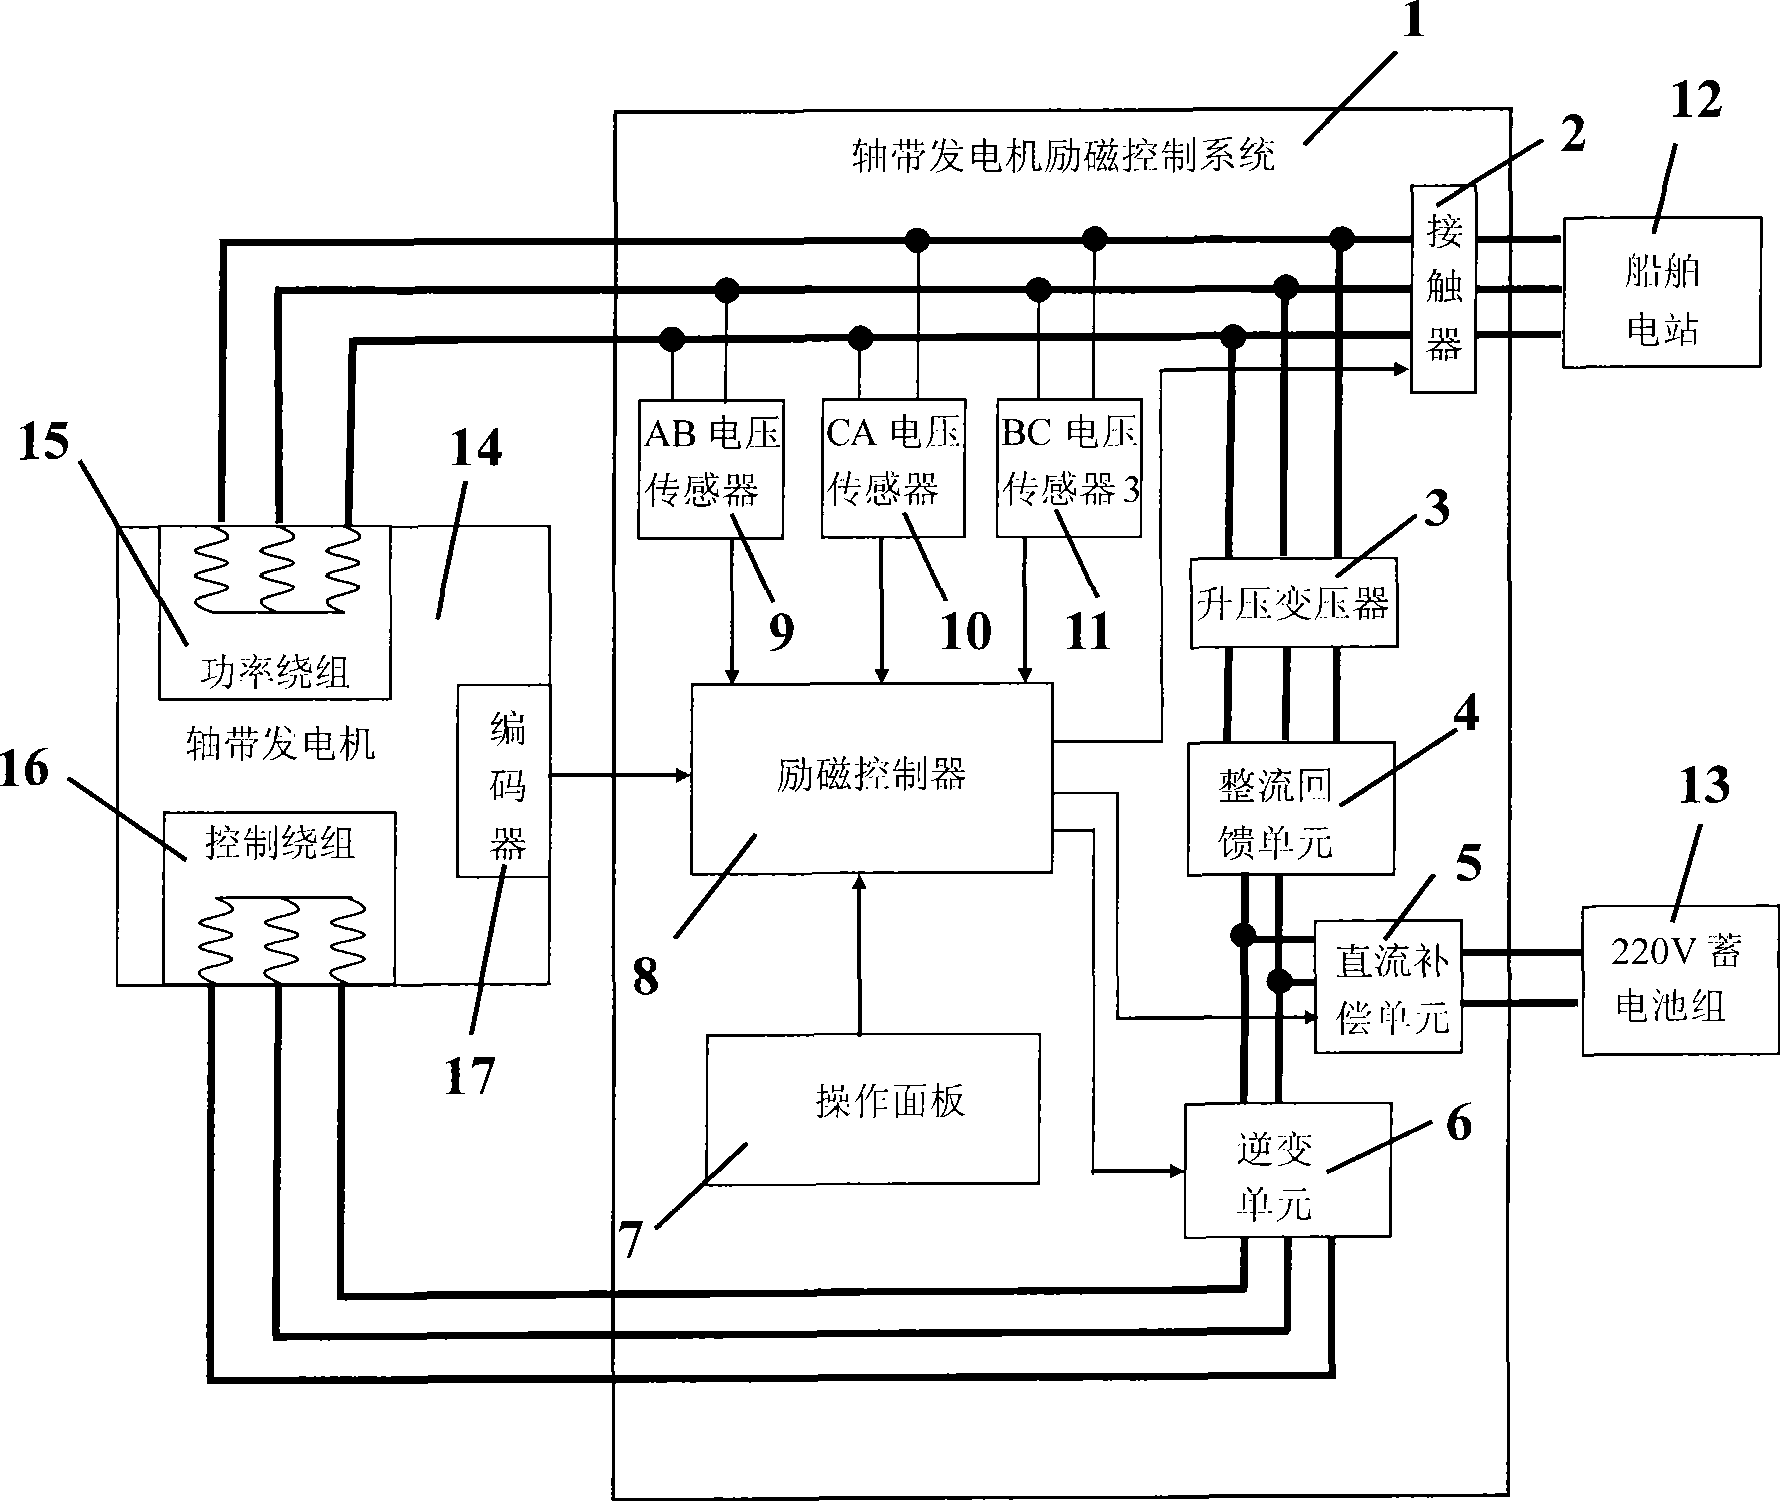 Excitation control system architecture and control method for marine diesel brushless double fed shaft generator